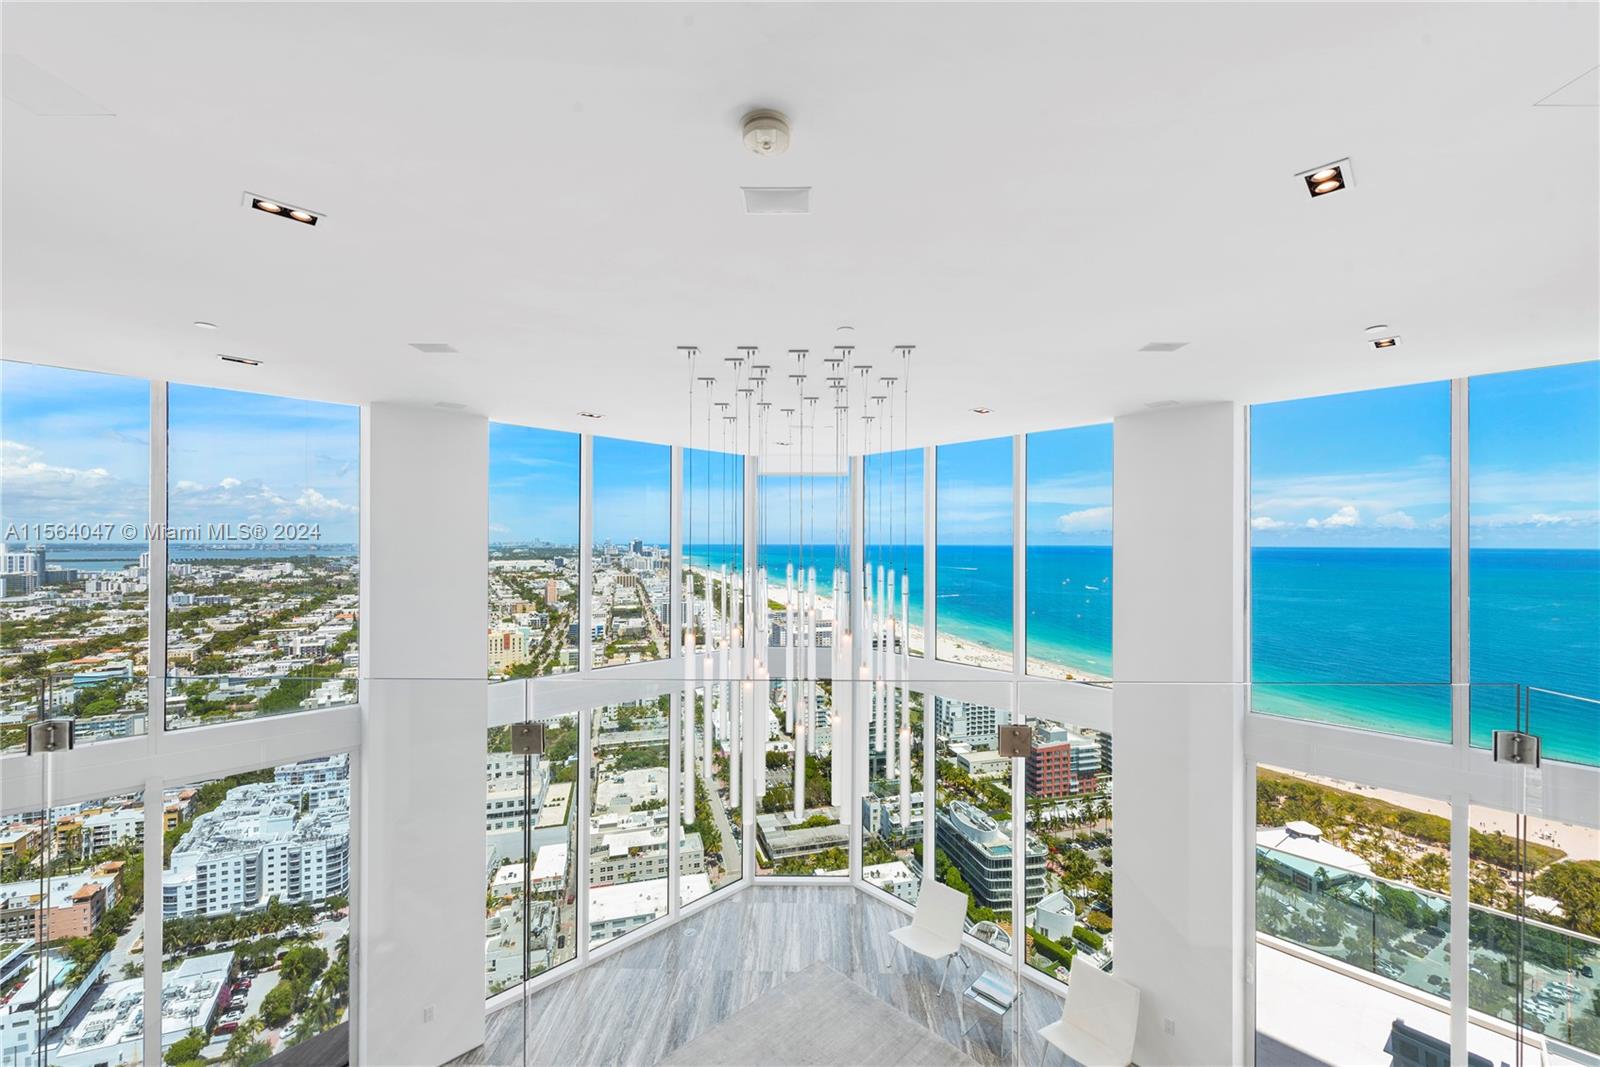 One-of-a-kind, 360 degree view, two-story Penthouse was recently transformed by renowned designer Sands Studios and sits in the heart of Miami Beach's iconic "South of Fifth" neighborhood. Offering 8,400sf of living space and a private rooftop, enjoy 360-degree views spanning the Atlantic Ocean to Biscayne Bay and the glittering skyline. This 5BR, 5-full and 2-half BA industrial/modern design offers unique finishes from a bank vault inspired door to a back lit honeycomb Onyx wall, 2 grand stairways, 18-ft ceilings, silver travertine floors, rare Mikasa wood, chef’s kitchen with seamless stainless steel and book matched Statuary Marble. Features include an interior elevator, private sauna/steam room and luxe building amenities with 24-hr security, concierge, pool/spa and fitness studio.